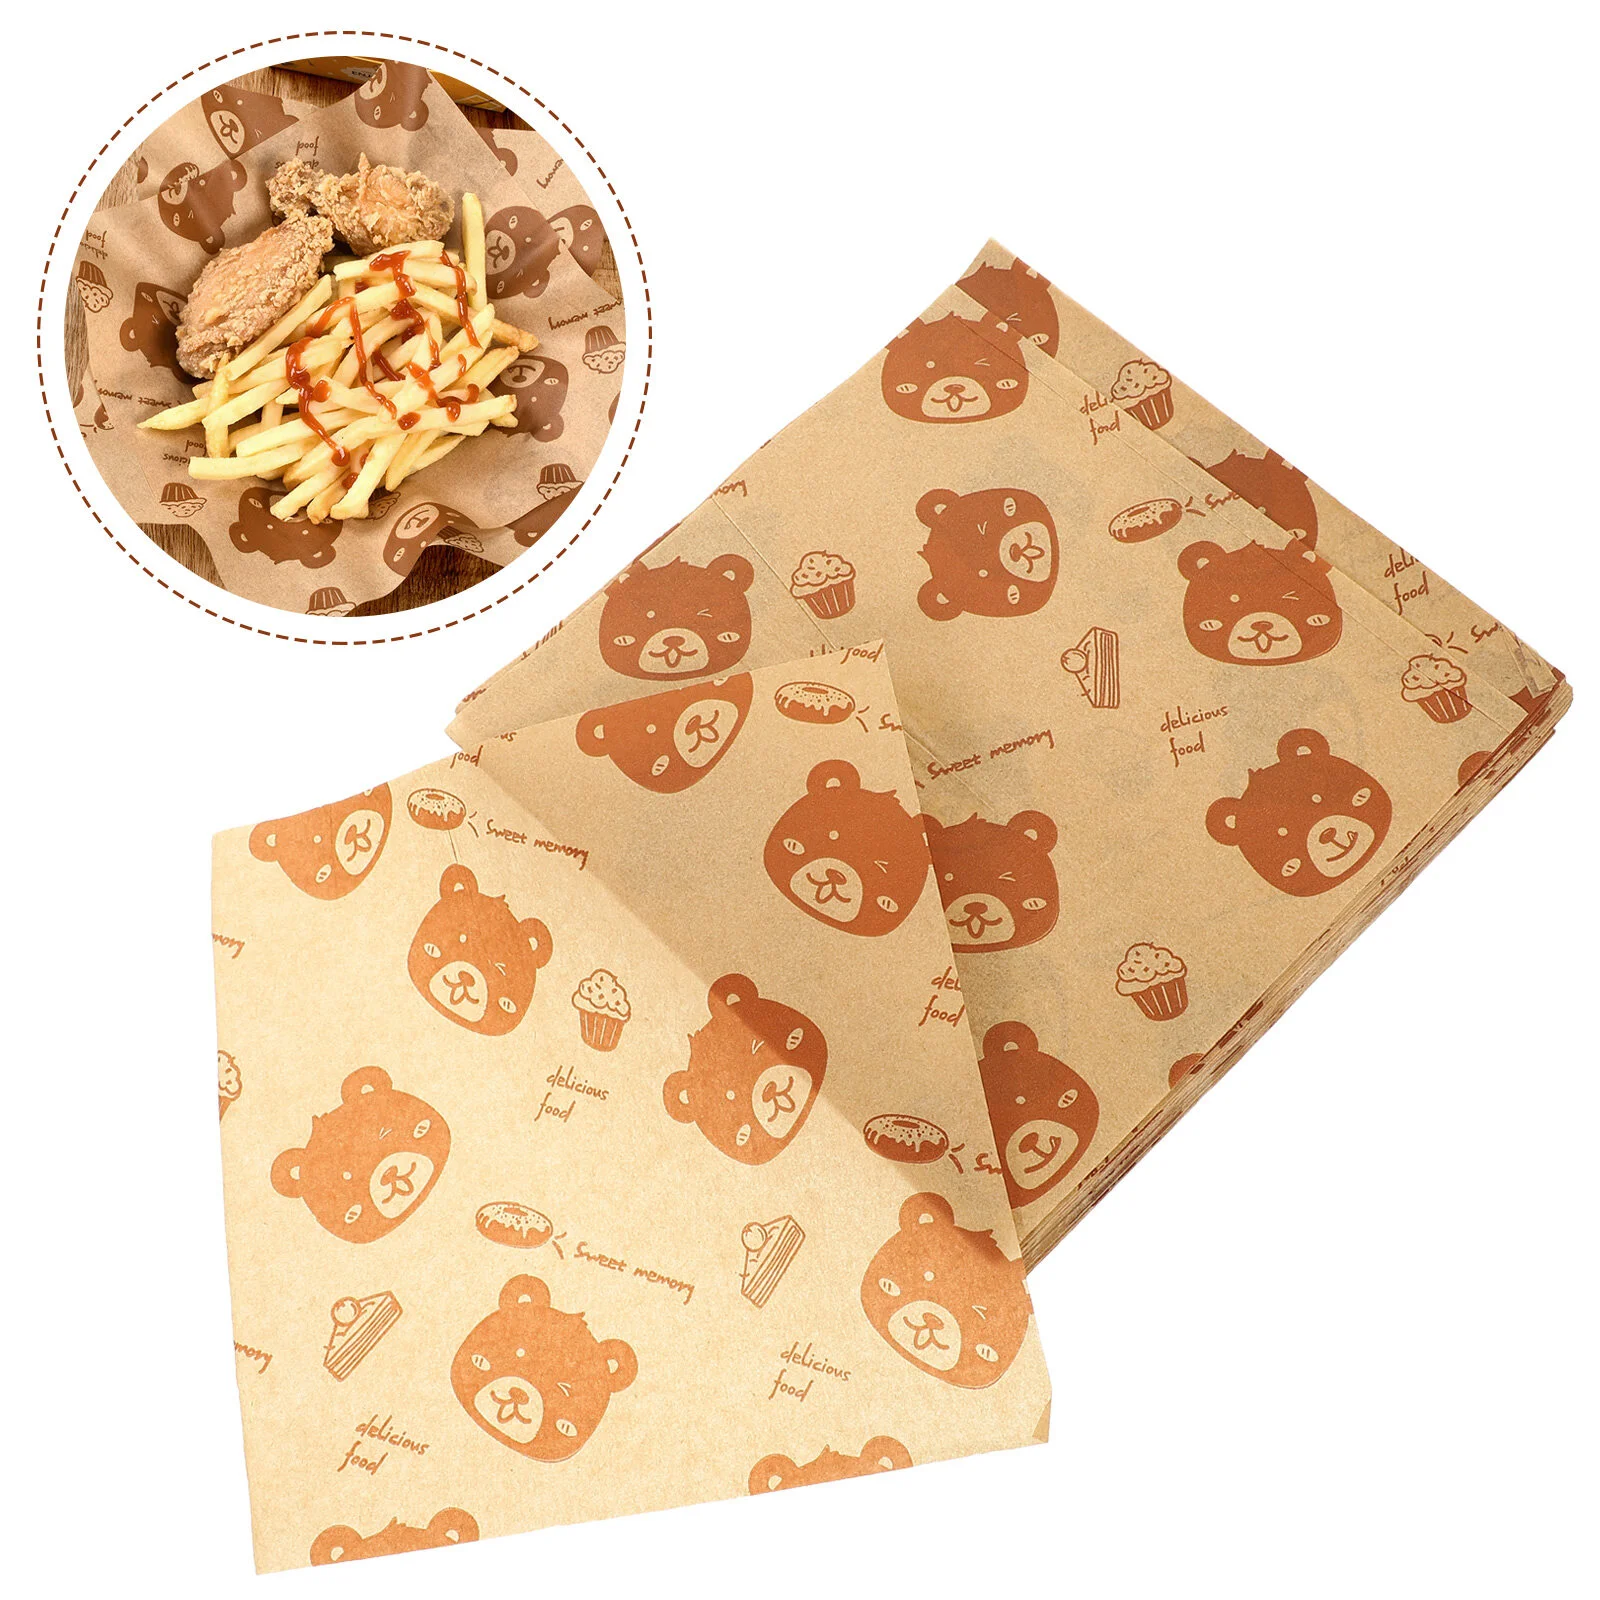 

500 Sheets Food Basket Paper Cheese Sandwich Wrapping Multi-function Wrappers Deli Liners French Fries Bread Greaseproof